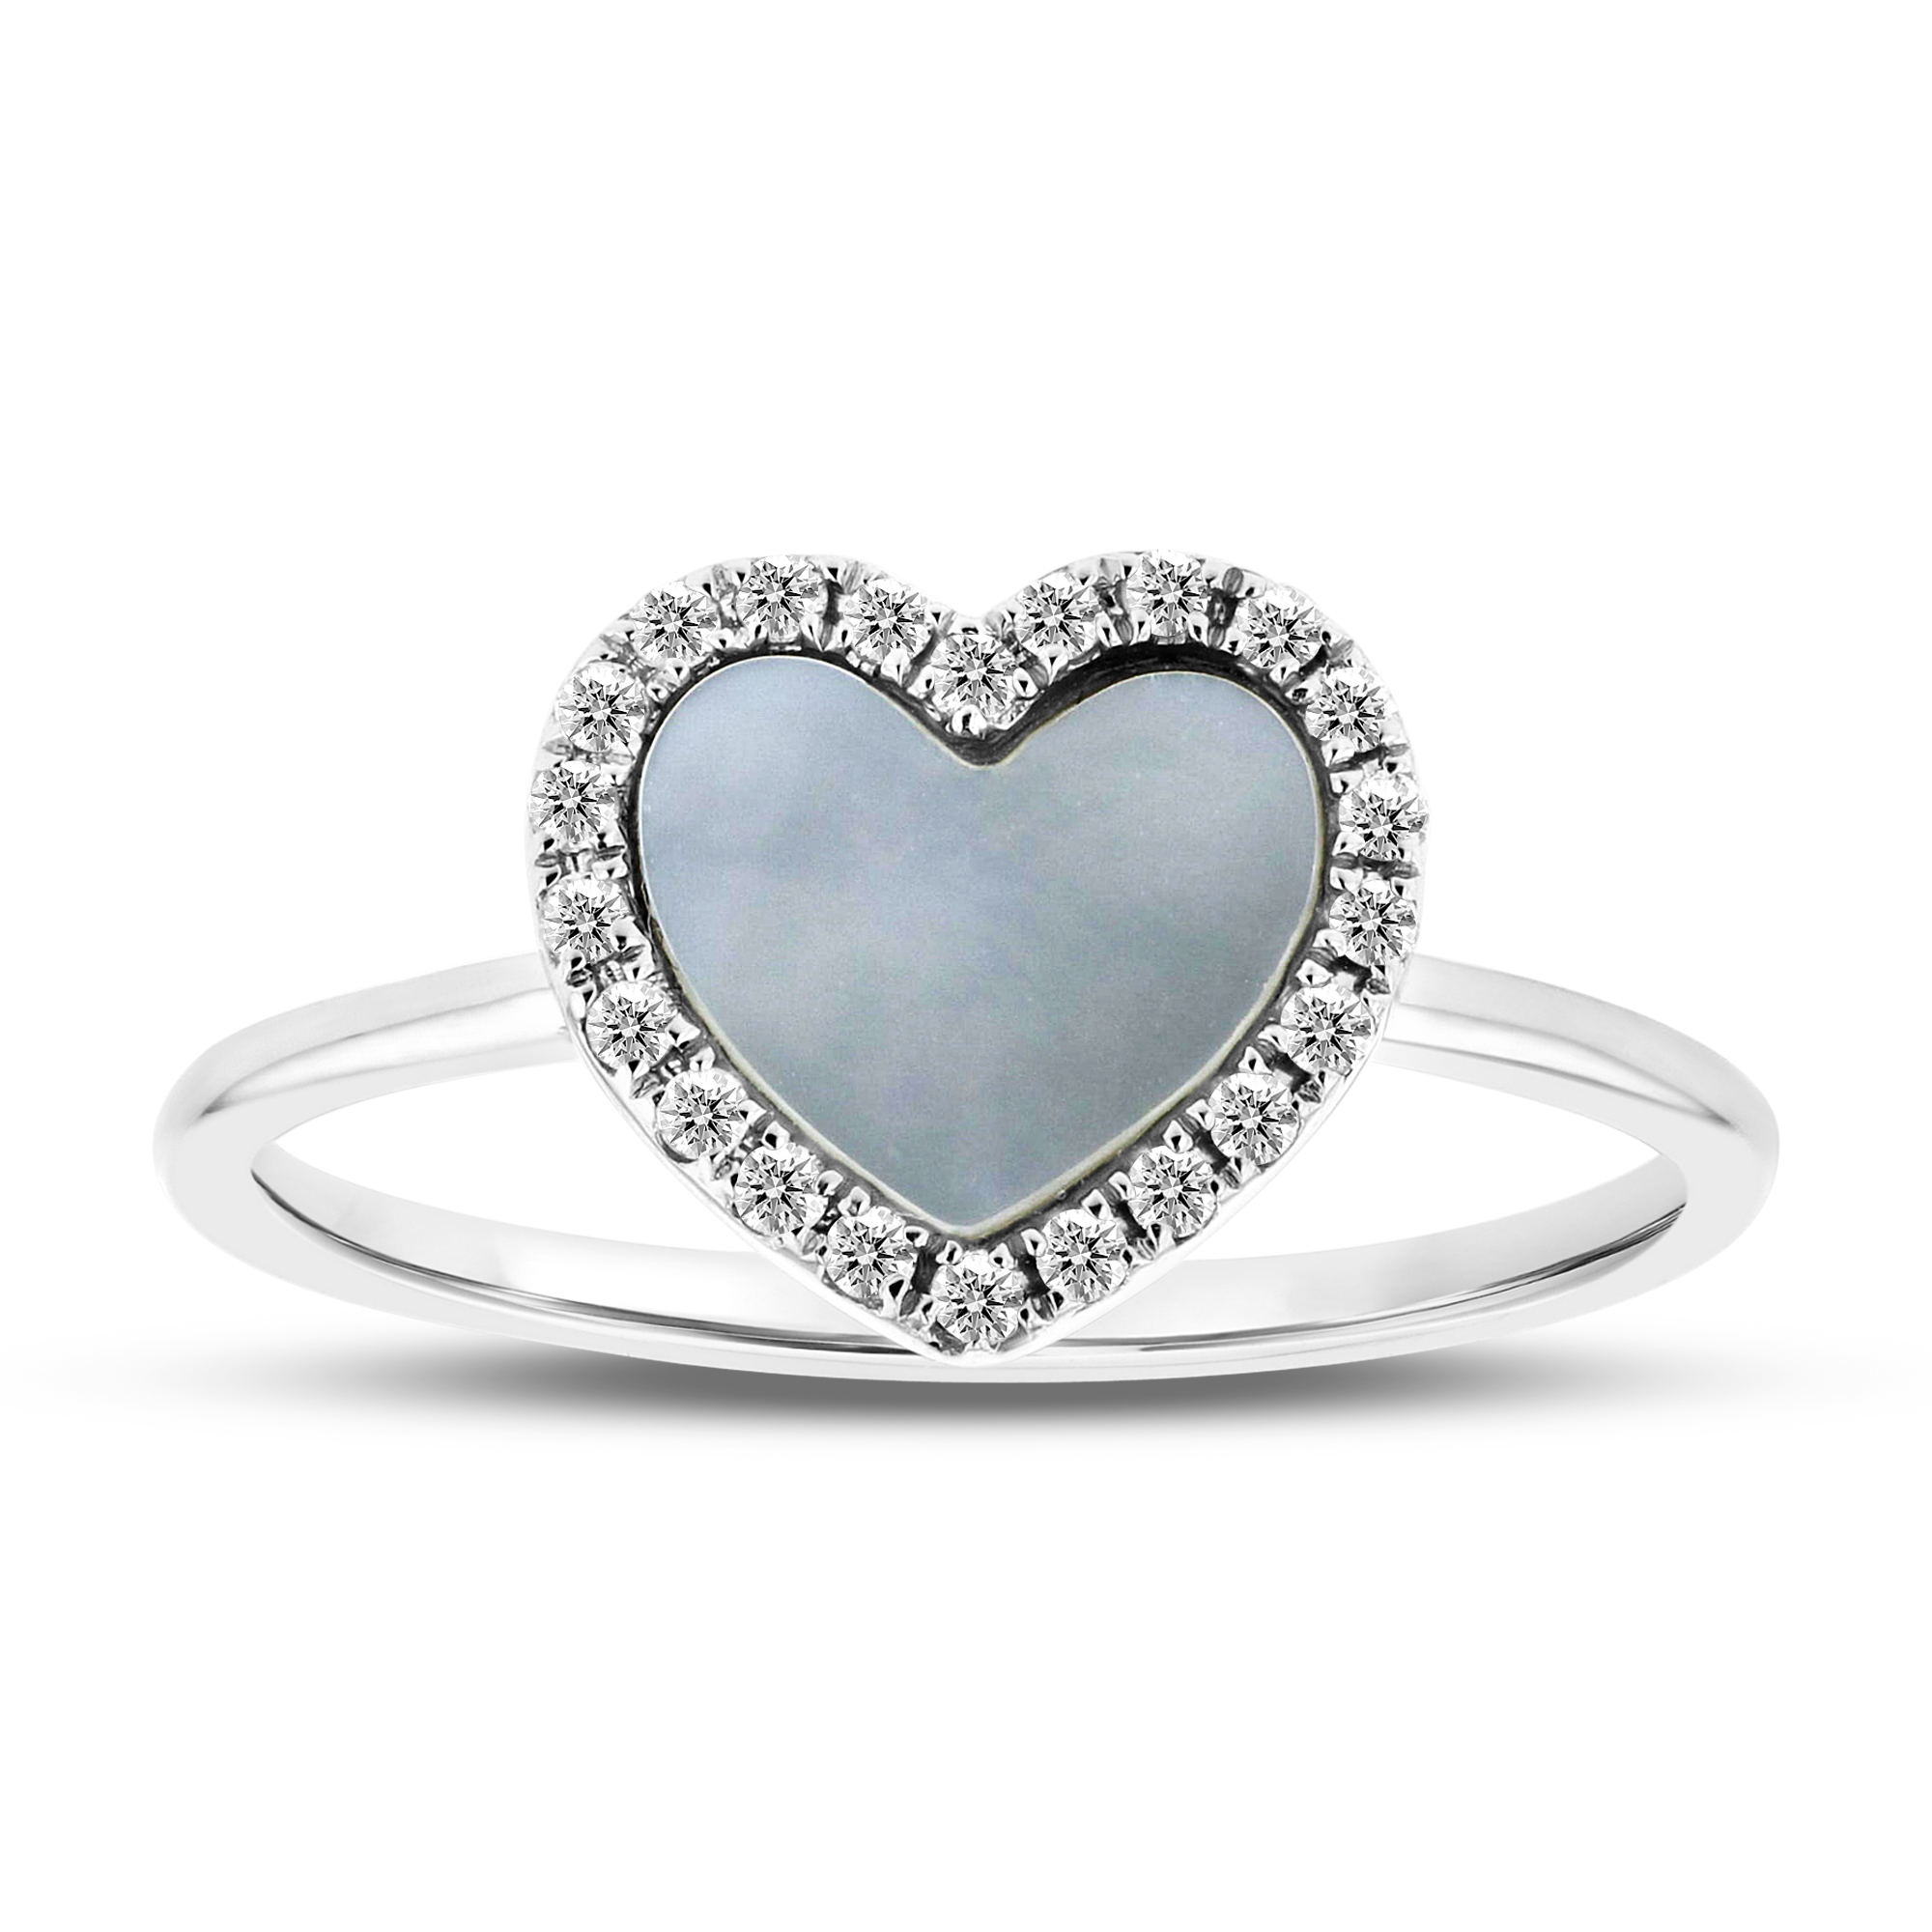 View 0.58ctw Diamond and Mother of Pearl Heart Shaped Ring in 14k White Gold